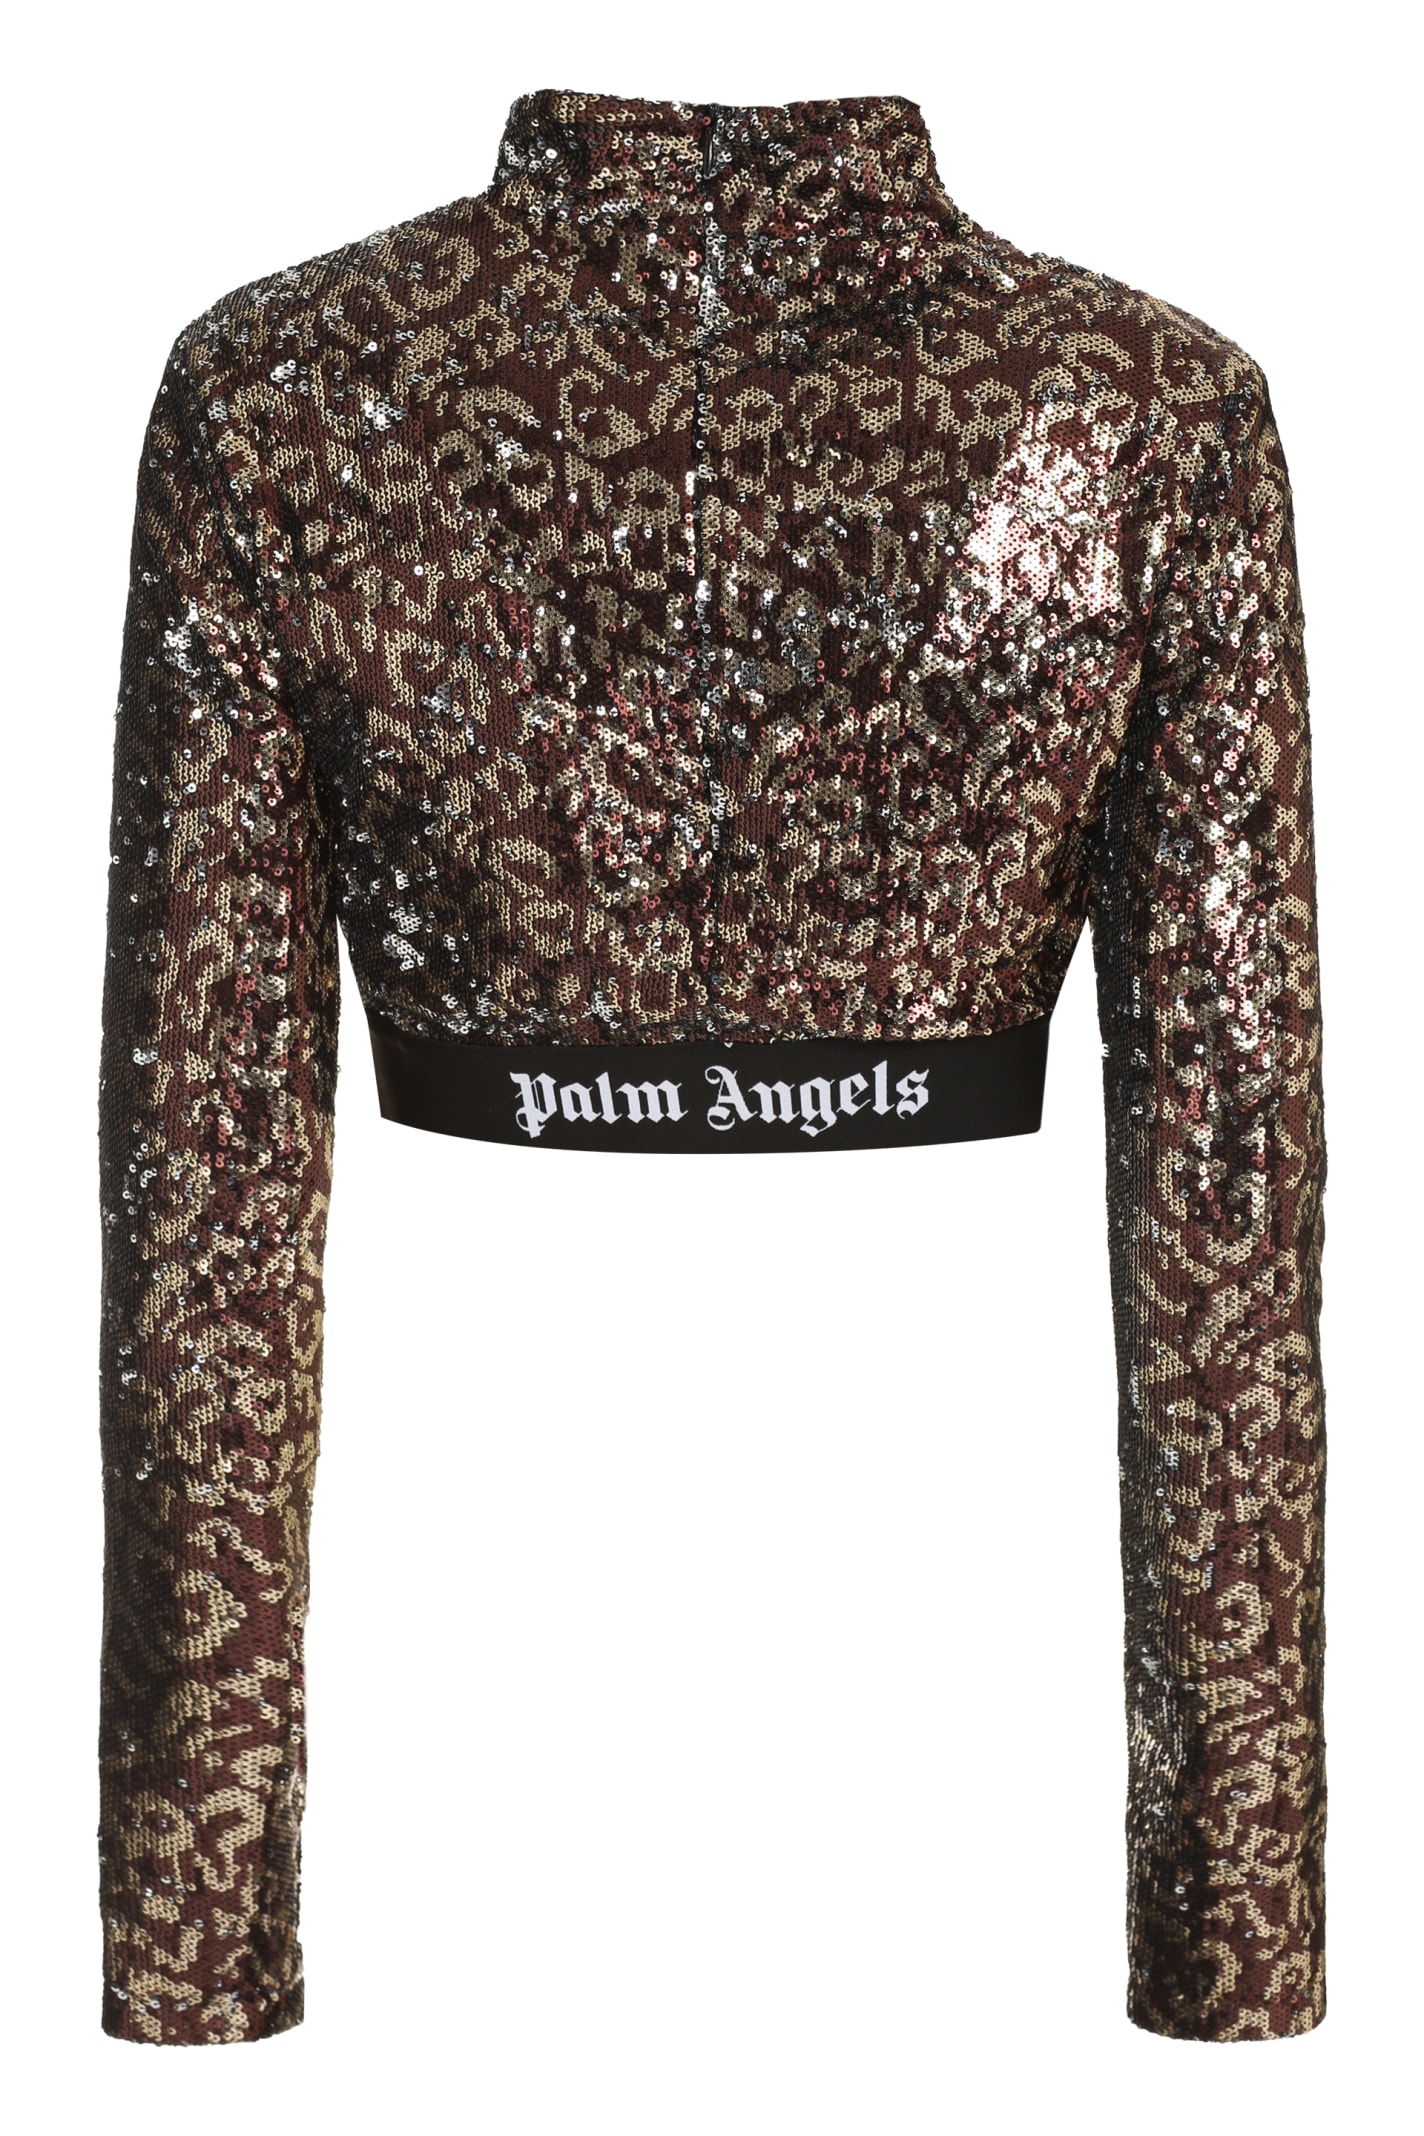 Shop Palm Angels Sequin Top In Animalier